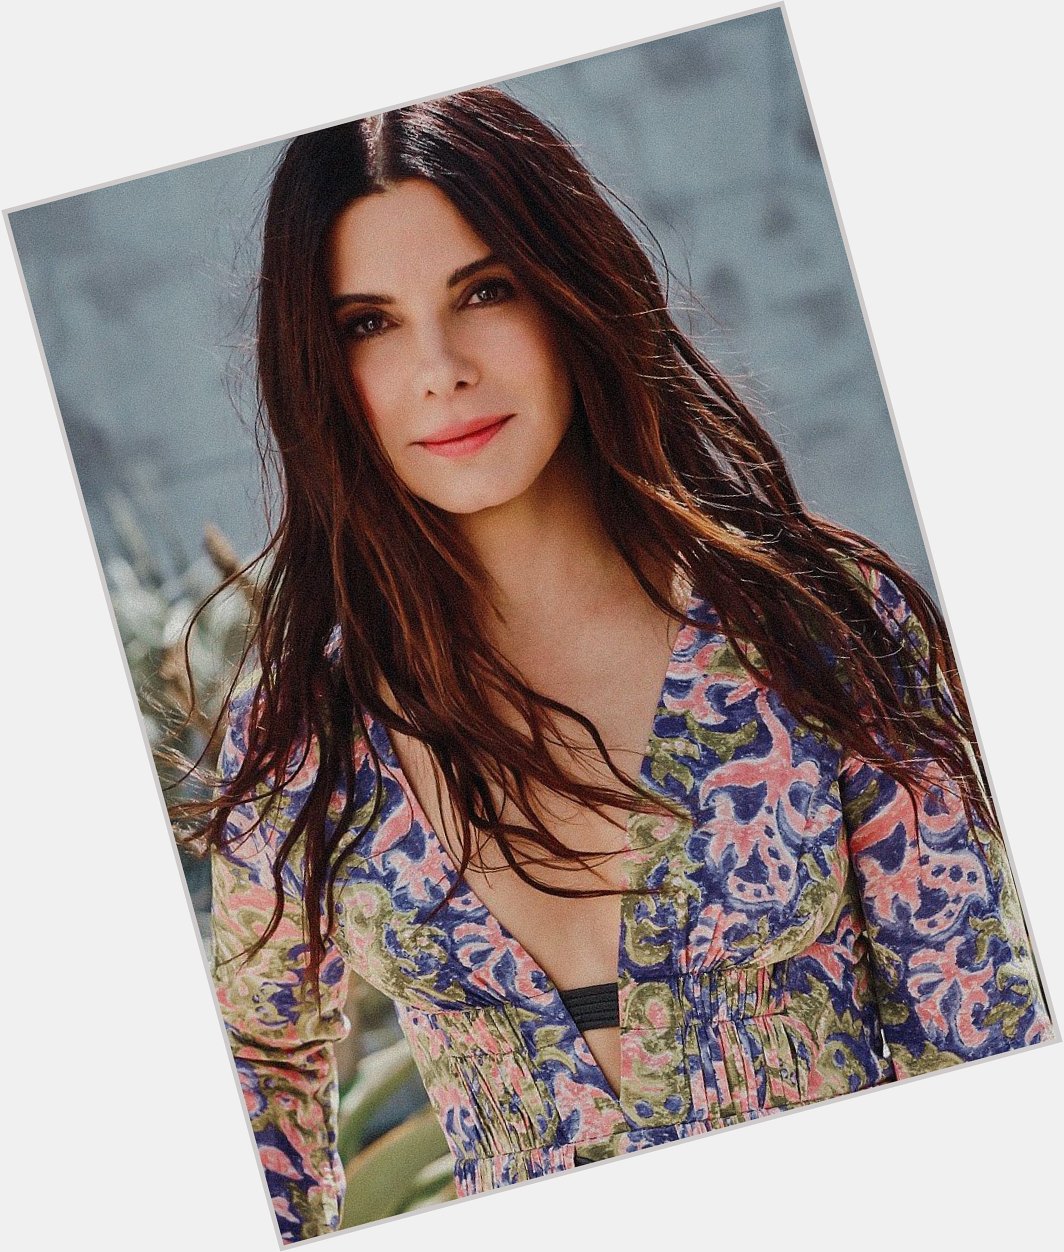 Happy birthday to the ever so talented and powerful human being, sandra bullock! 57 never looked SO good! 